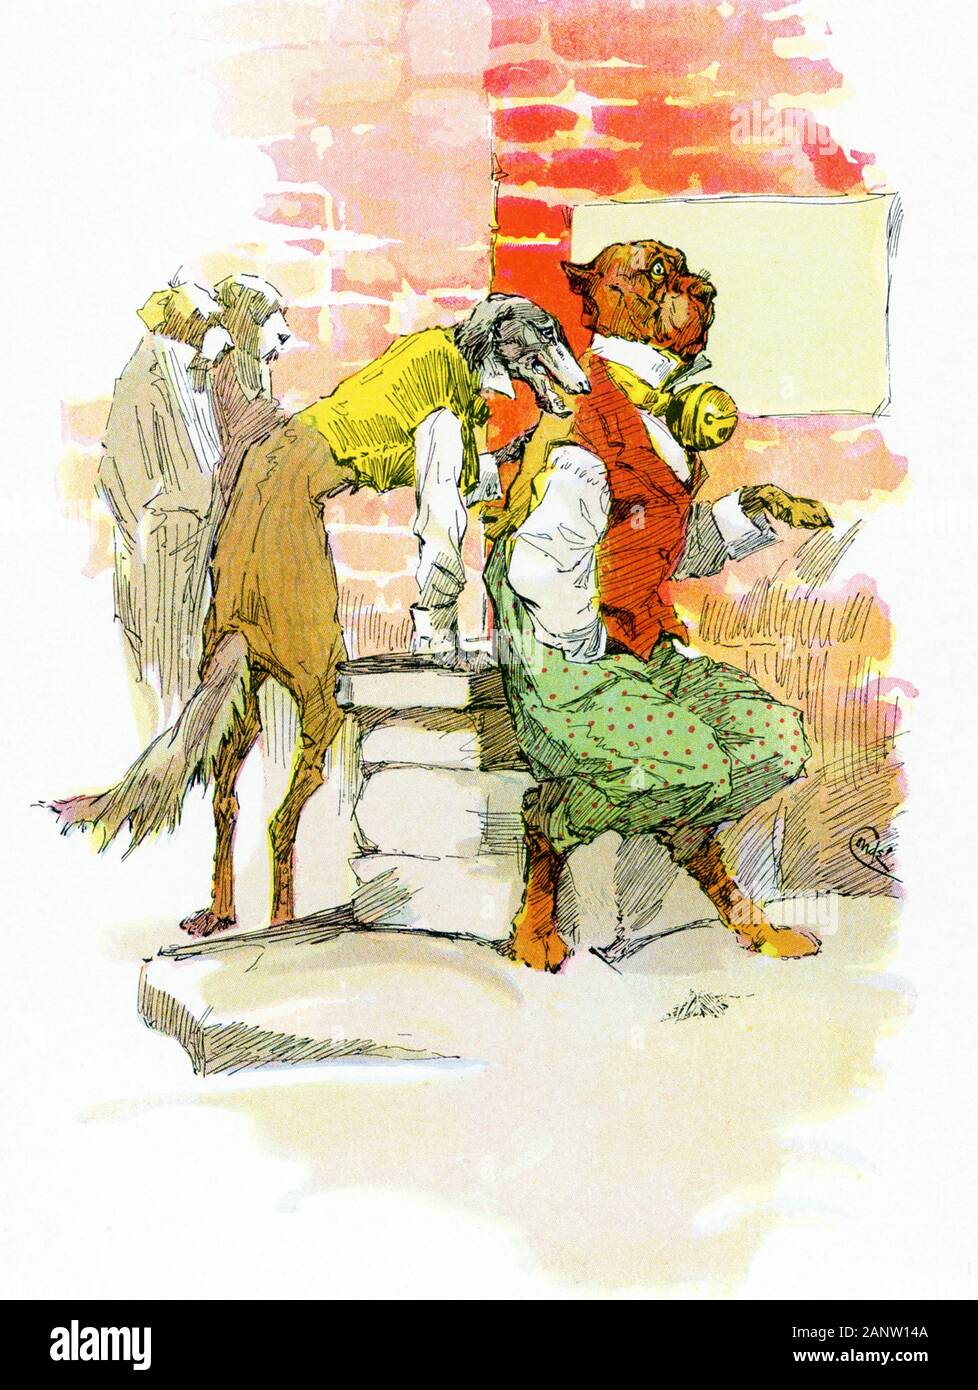 J.M. Conde illustrated the tales of the legendary Greek fablist Aesop, including the story of the Mischievous Dog, with its moral 'Notoriety is often mistaken for fame.' Conde published his drawings in 1905 in New York. Aesop was a sixth-century B.C. legendary composer of Greek fables, whose characters were animals. Each fable had a moral. It was said that  Aesop was a slave and had been freed by his master. Stock Photo